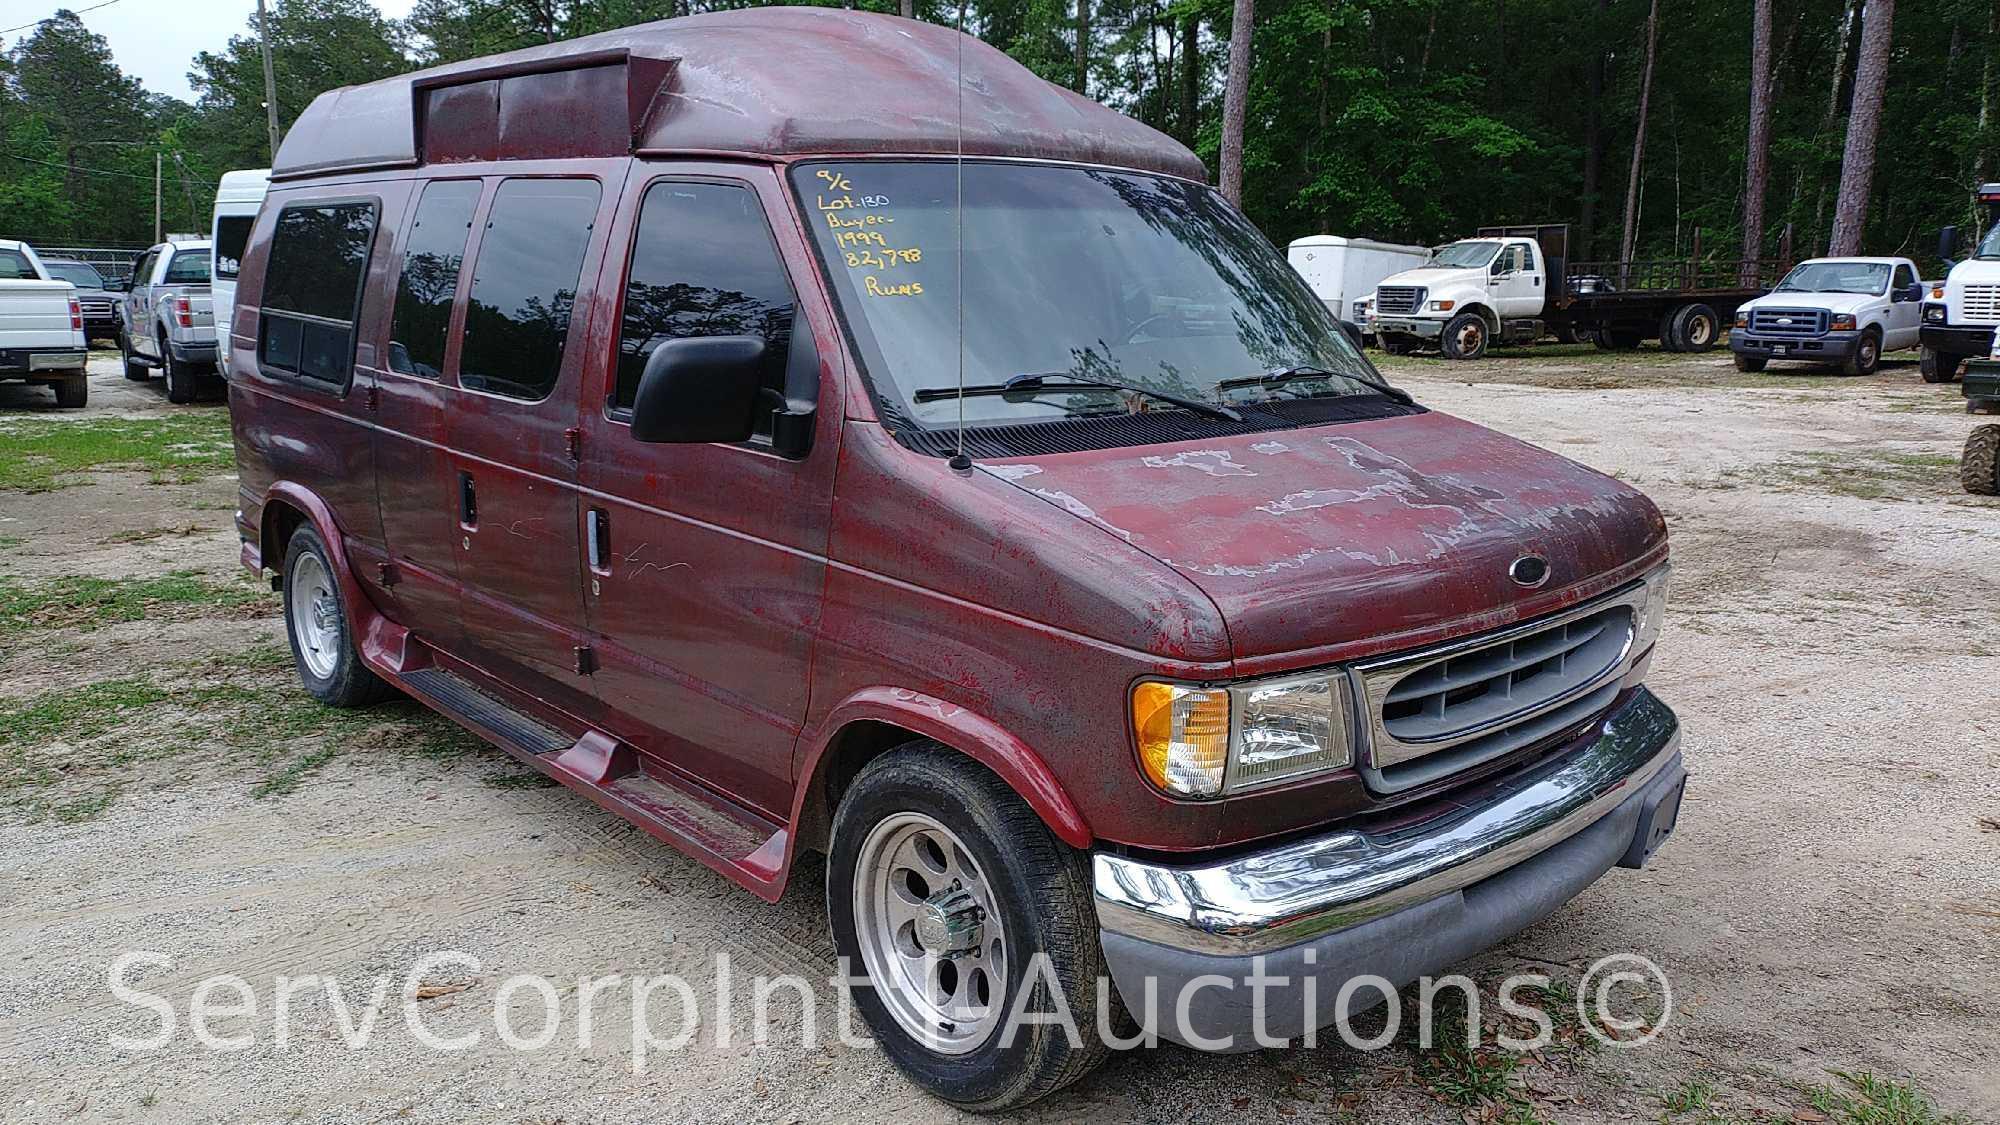 1999 Ford Econoline Van, VIN # 1FDRE1422XHC19172 with Wheel Chair Lift